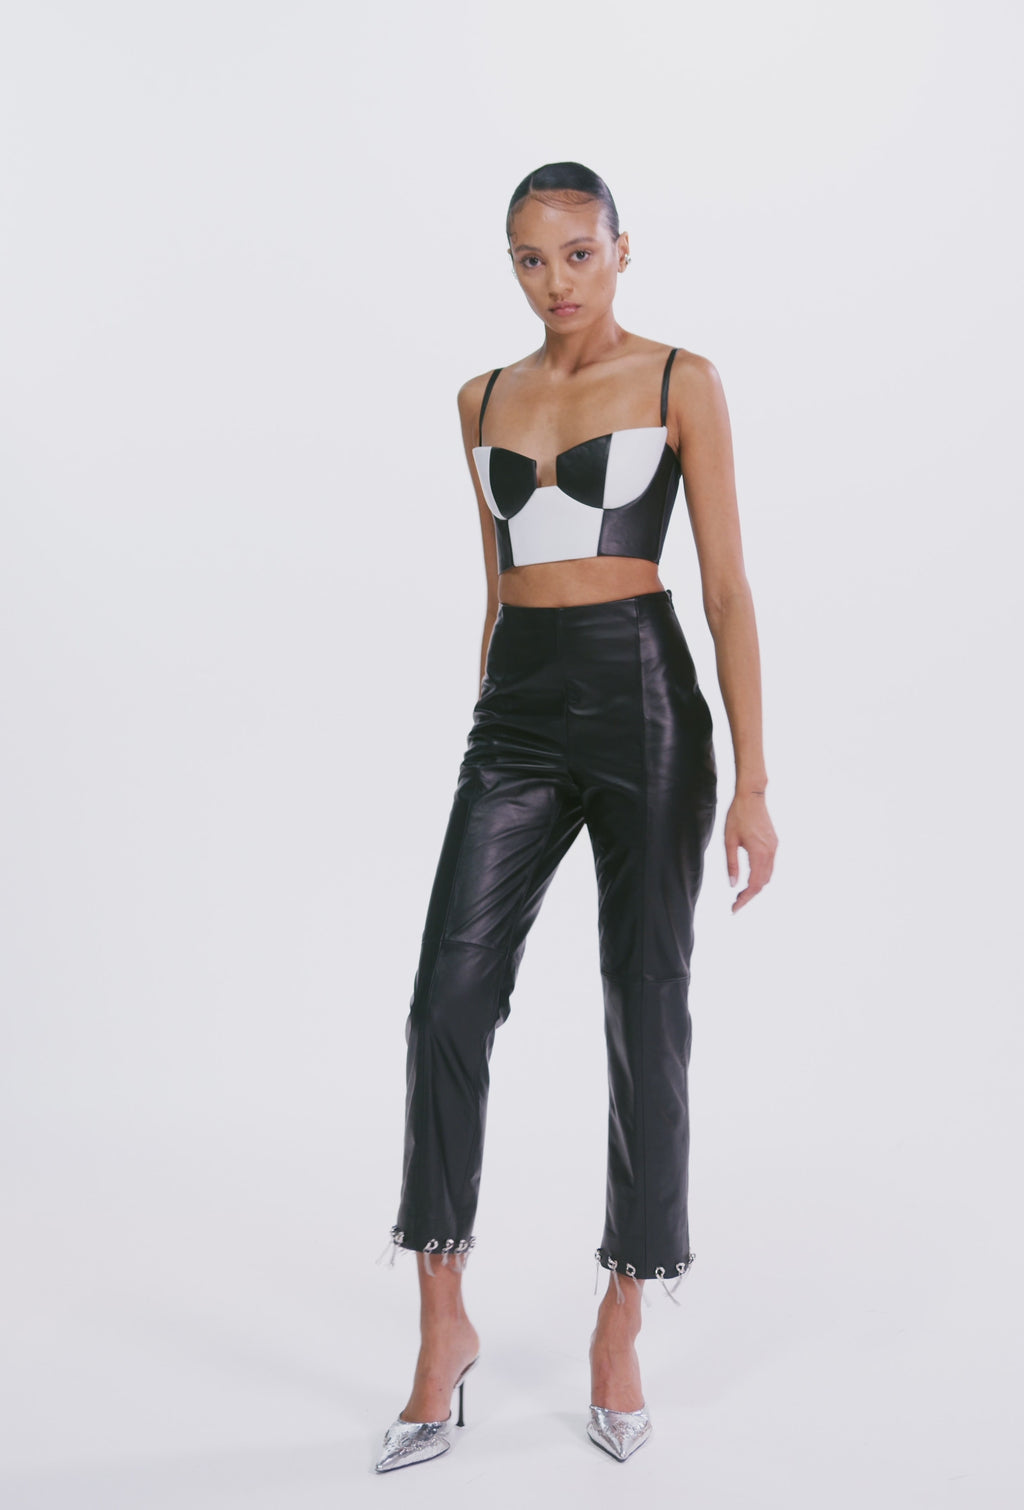 PRITCH ROGUE PATCHED BRALETTE